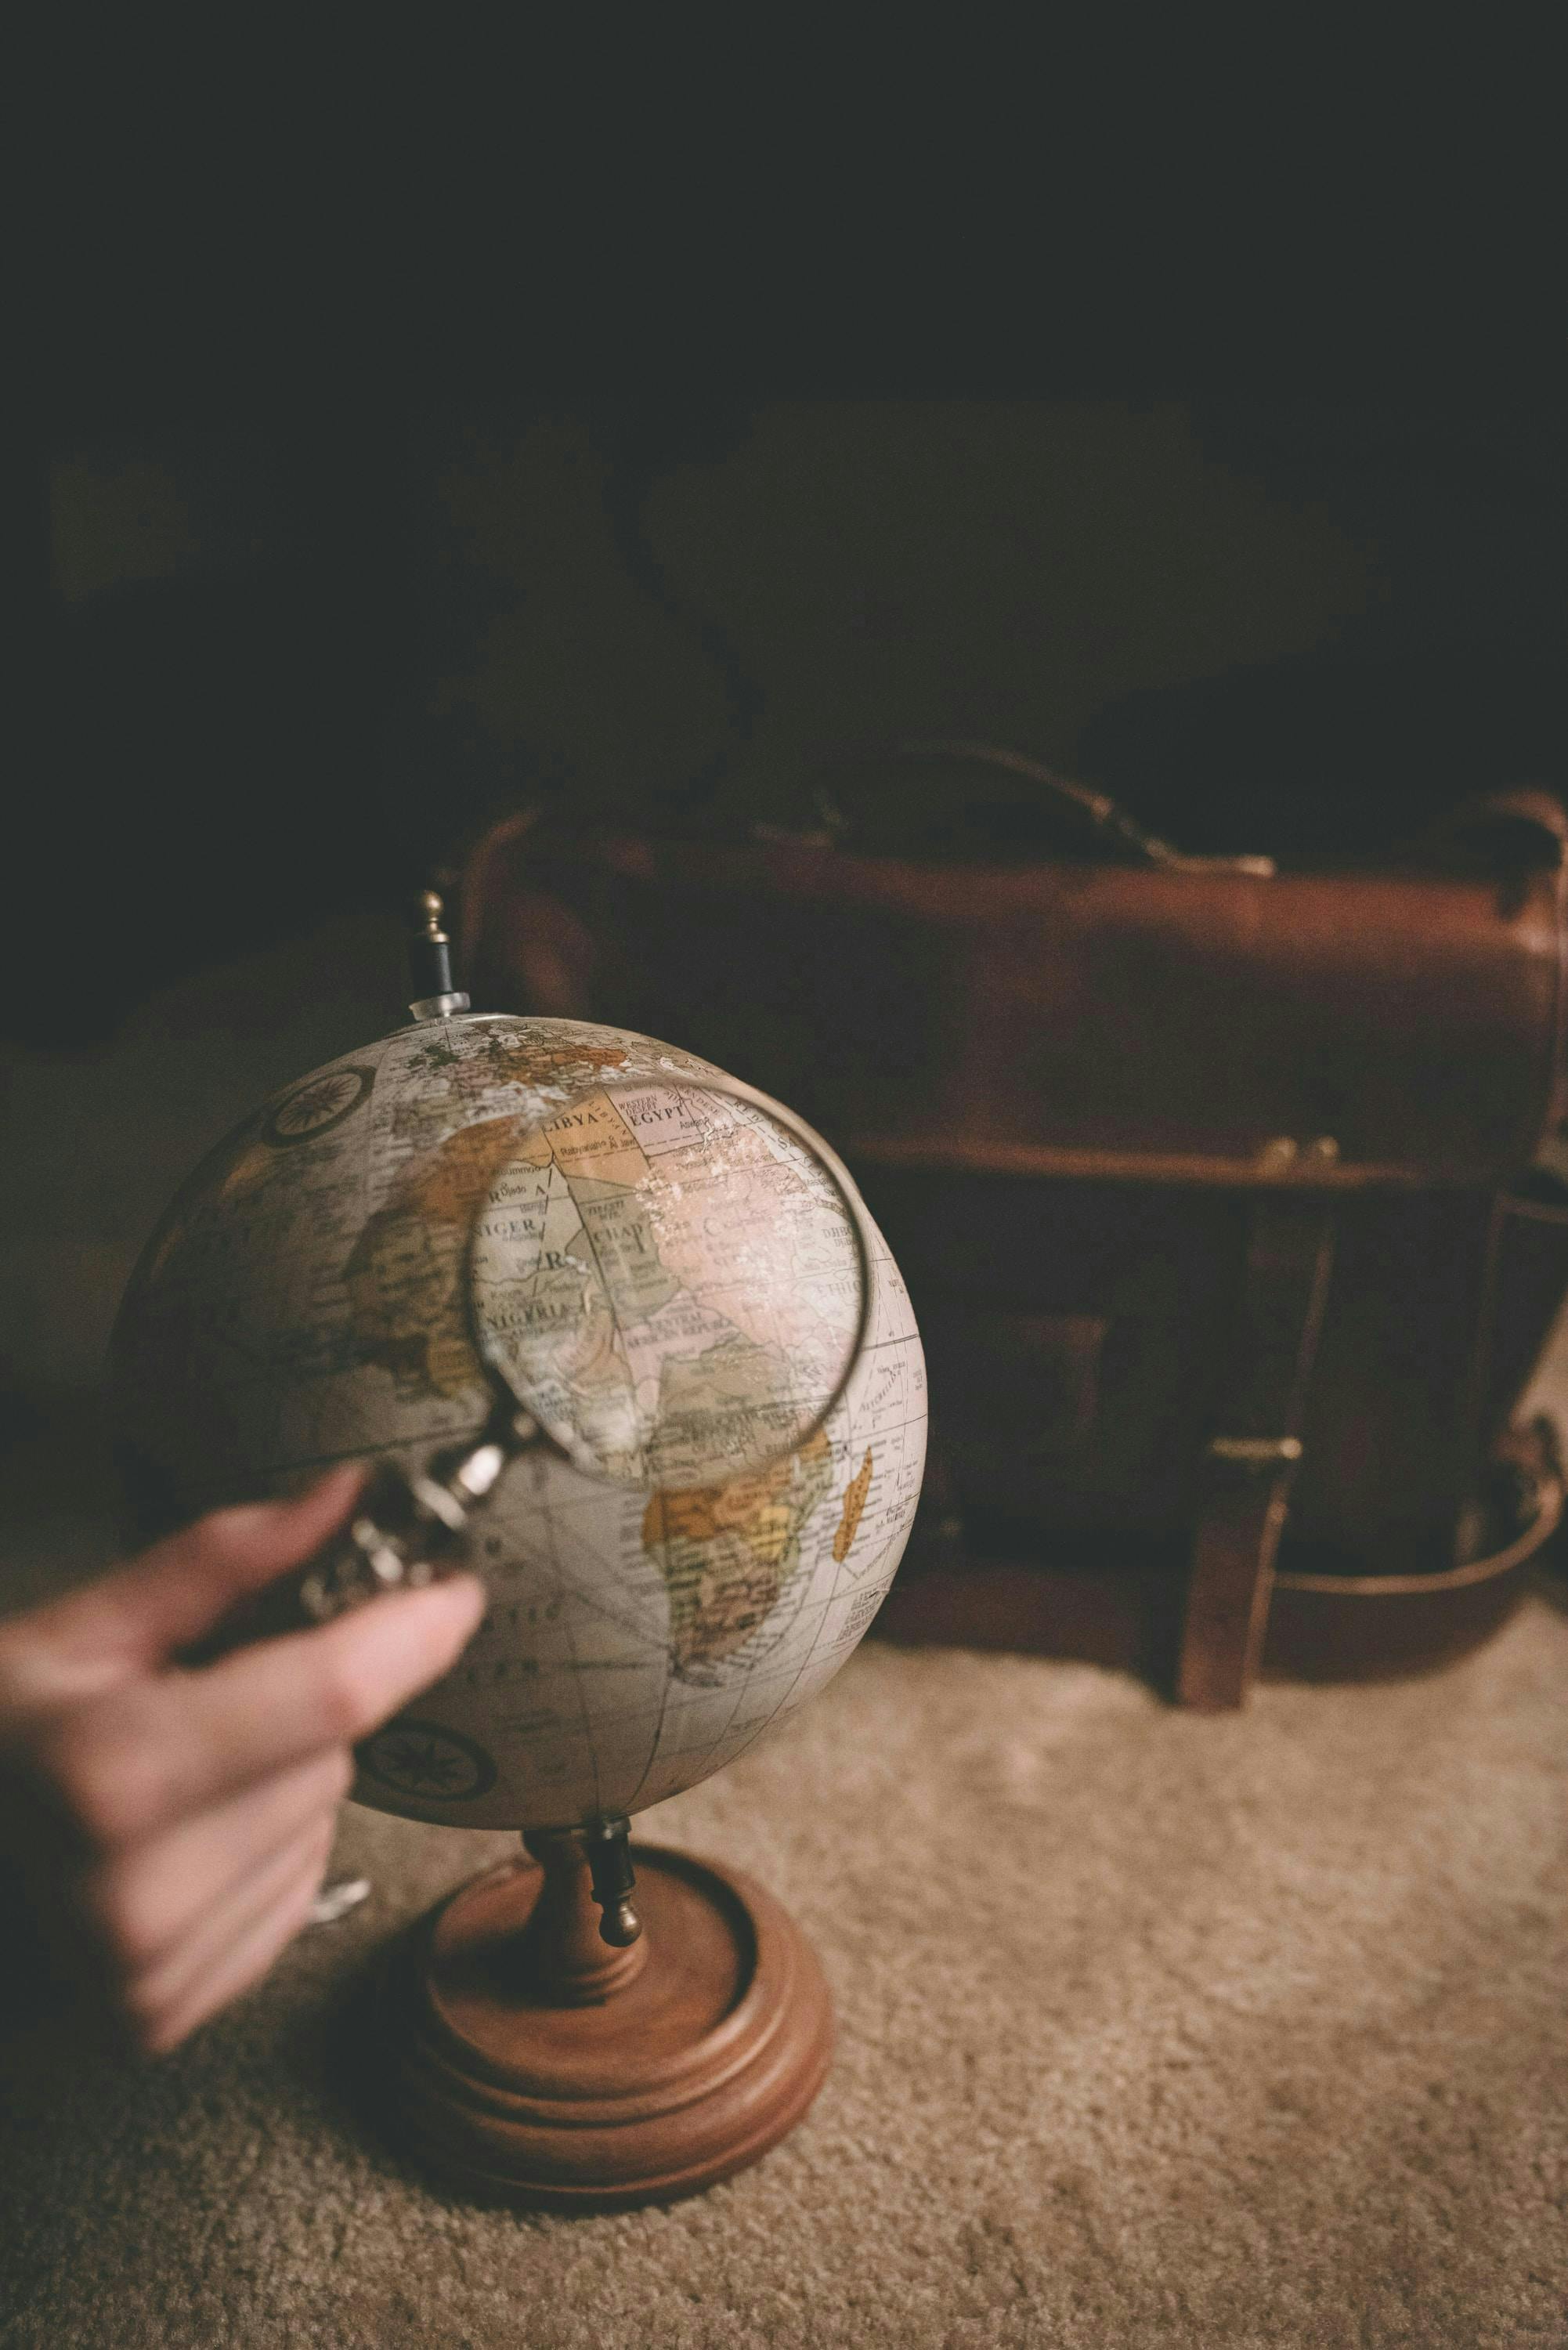 Black background, dark suitcase standing on beige carpet. In front of suitcase an old fashioned globe behind a hand holding a magnifying glass